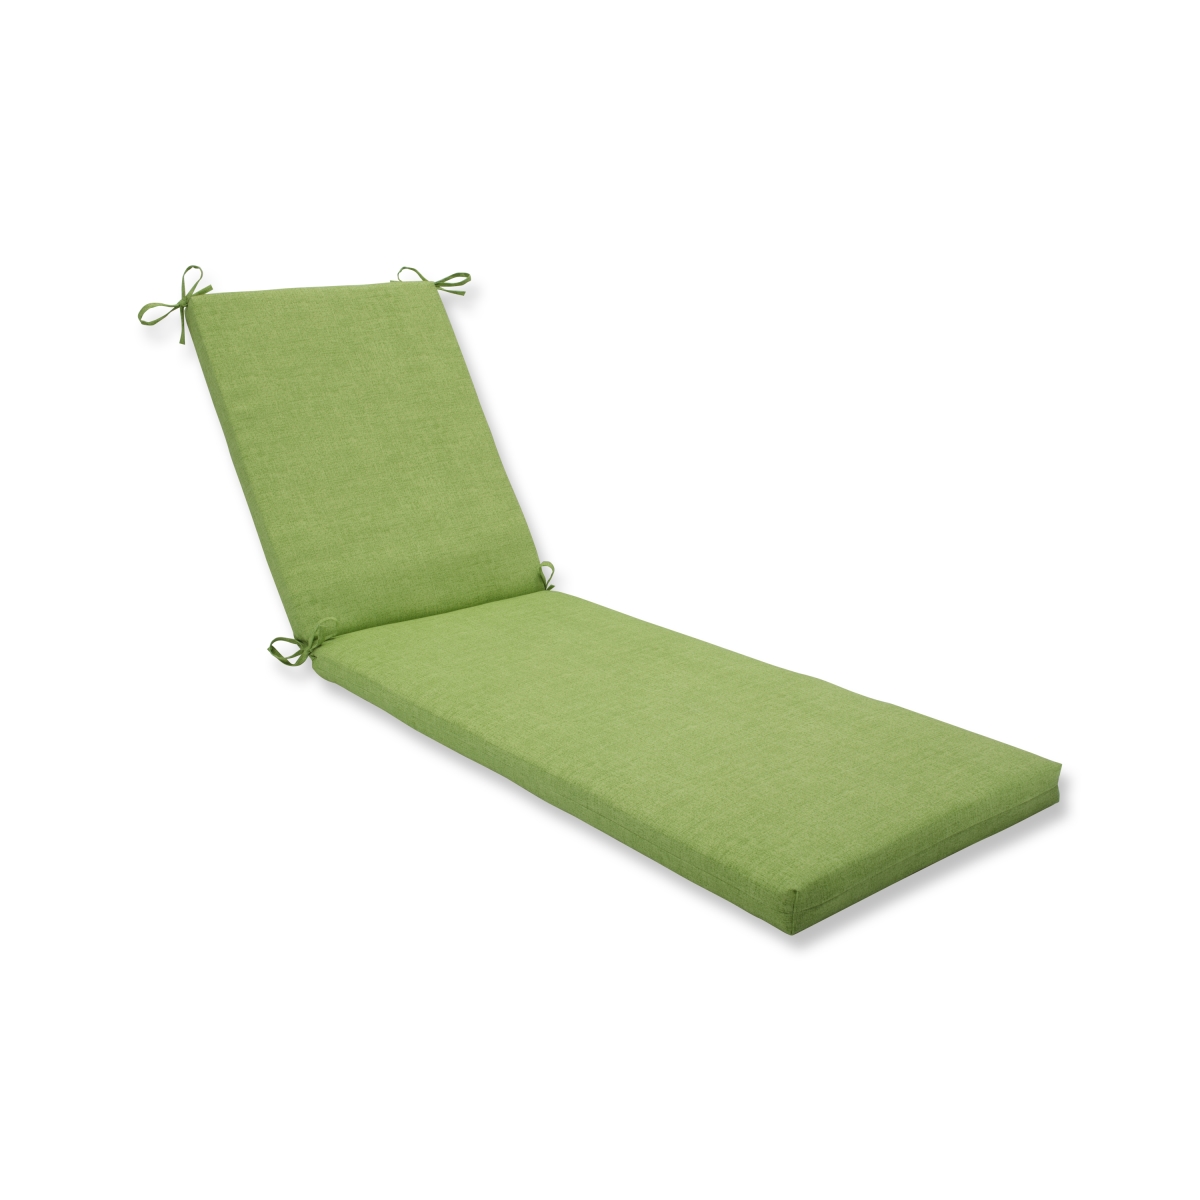 612881 80 X 23 X 3 In. Outdoor & Indoor Baja Linen Lime Chaise Lounge Cushion, Green